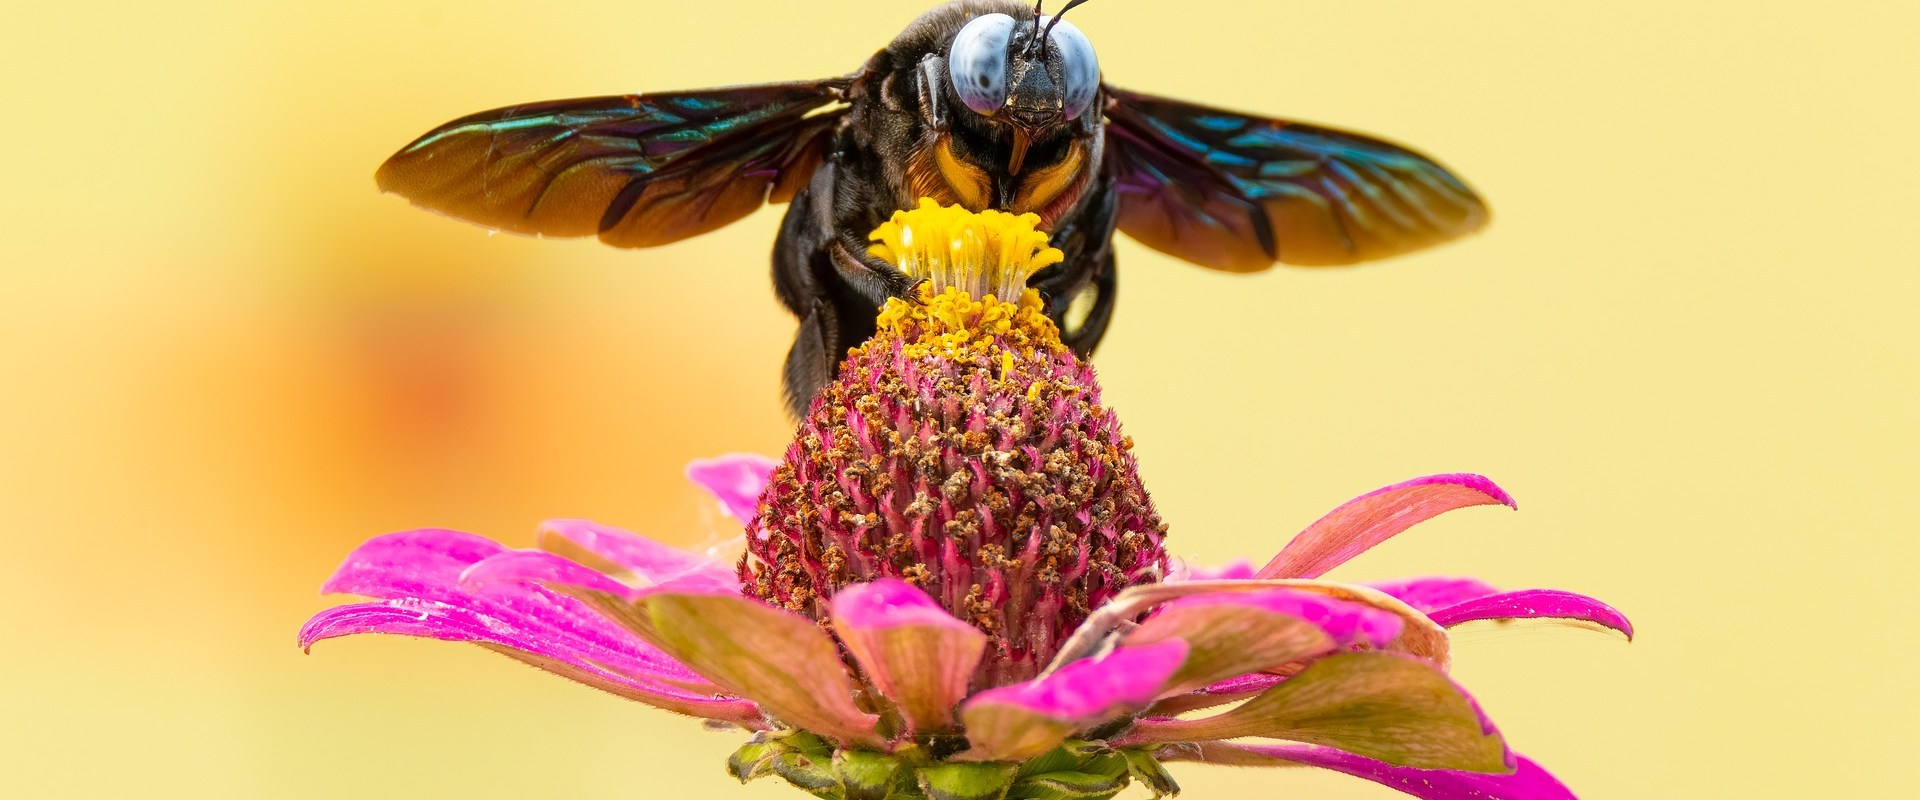 The Fascinating World of Bees